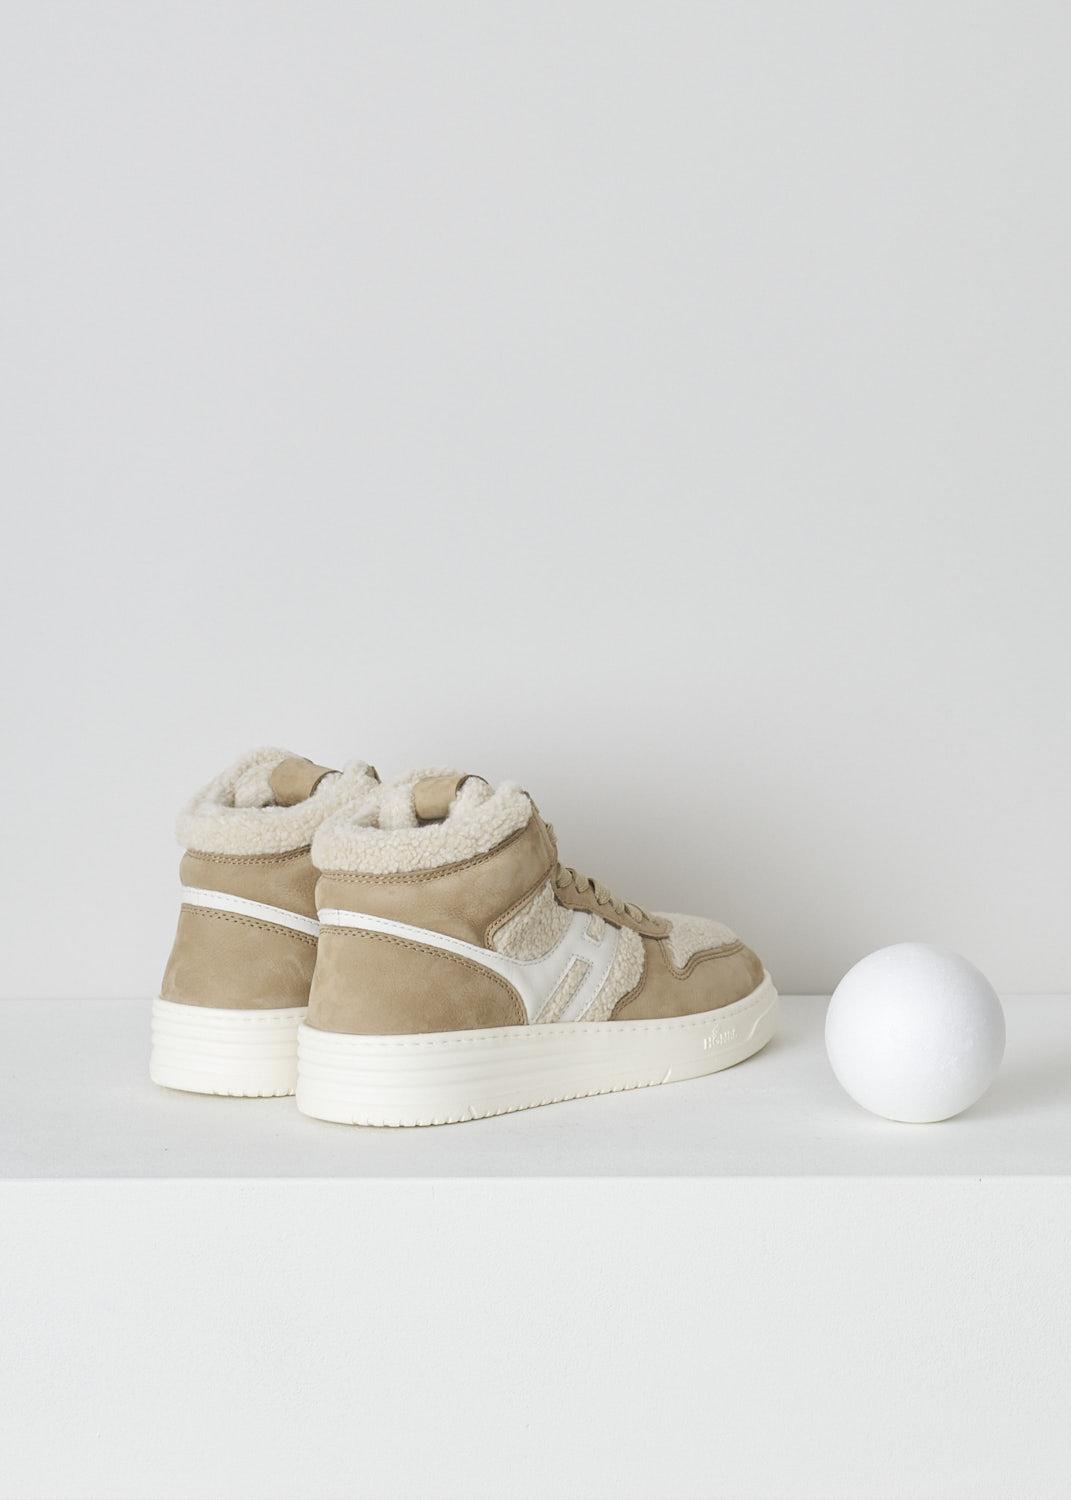 HOGAN, BEIGE TEDDY H630 BASKET SNEAKERS, GYW6300FE30SQW02S1_SQW, Beige, Back, These beige H630 Basket sneakers feature a front lace-up fastening with beige laces. On the tongue, a  brown leather tab has the brand's logo embossed on it. The sneaker consist of brown suede and white teddy fabric. On the side, the brand's H logo has been incorporated in the design in white leather.  These sneakers have a thick white sole. They come with an additional pair of laces in brown.   
